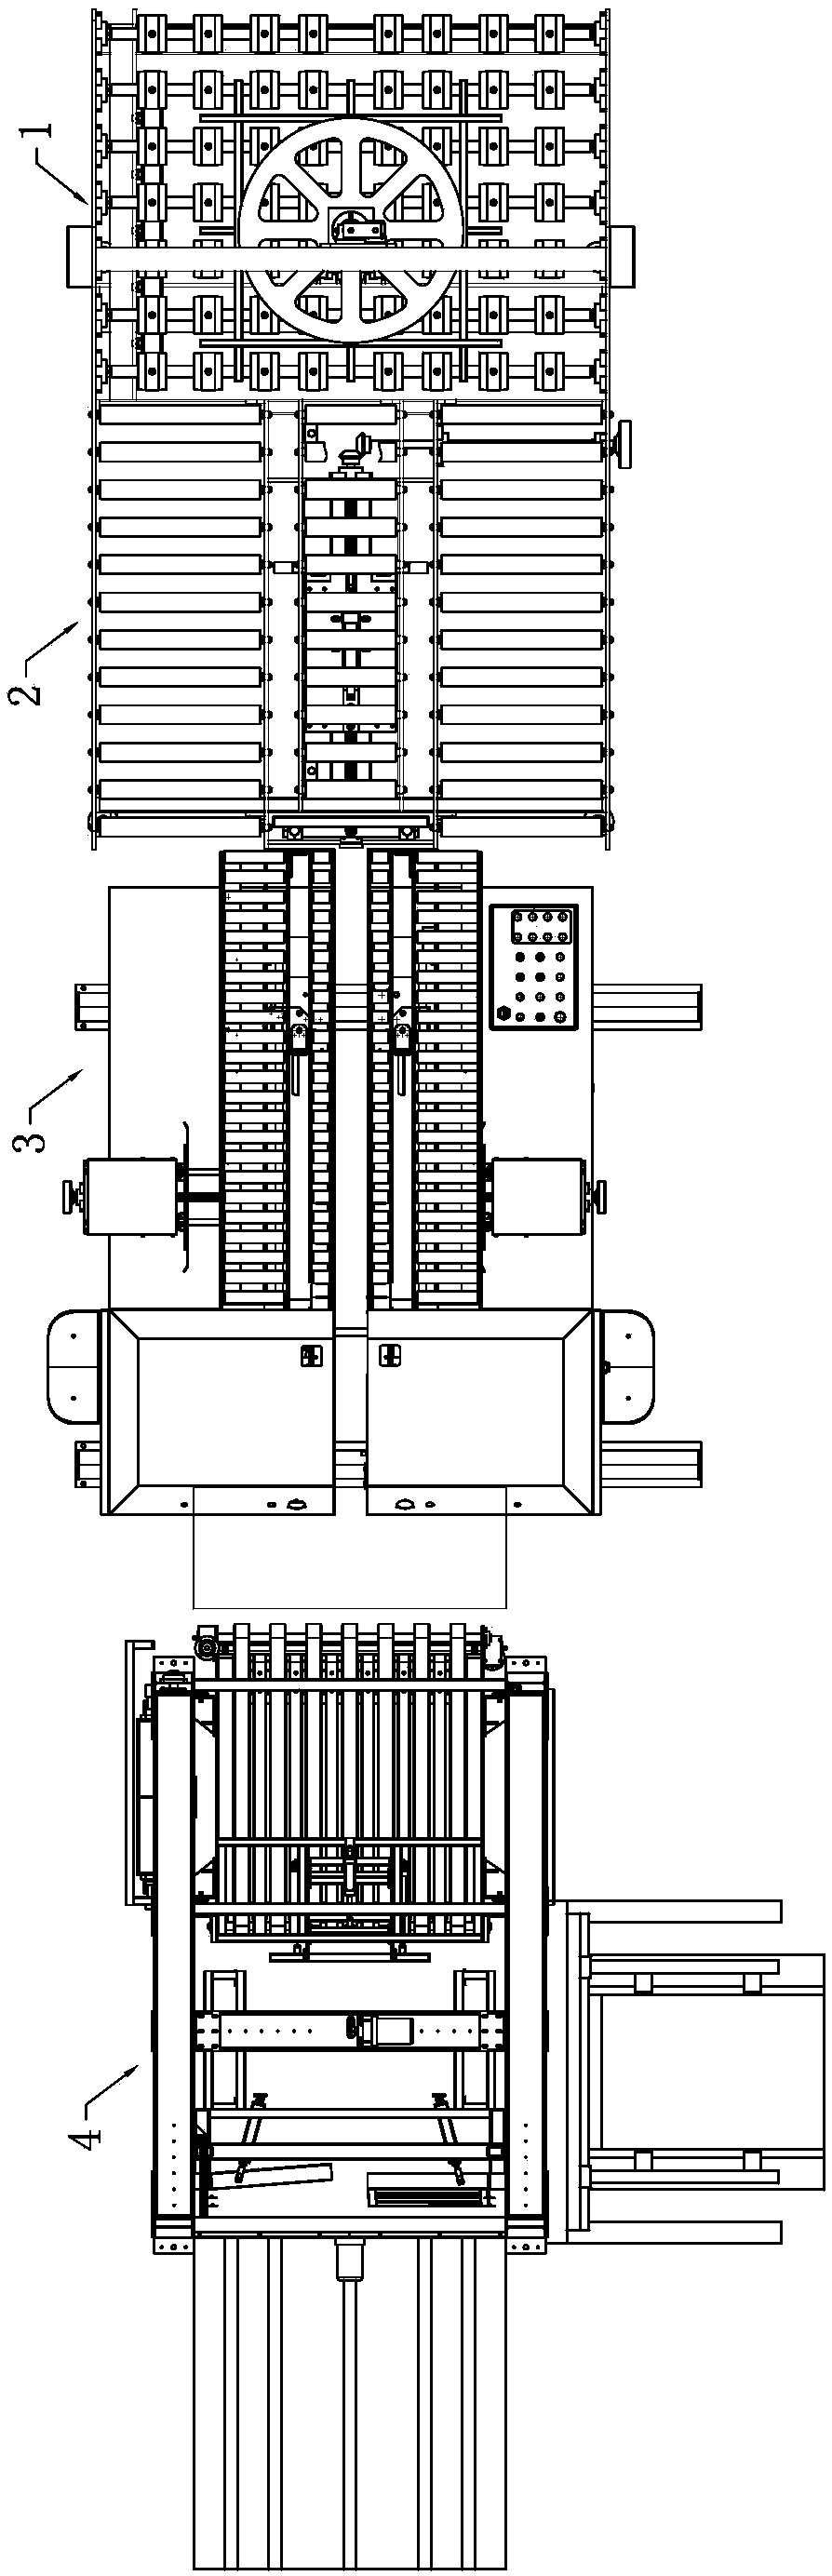 Full-automatic carton packing and stacking system